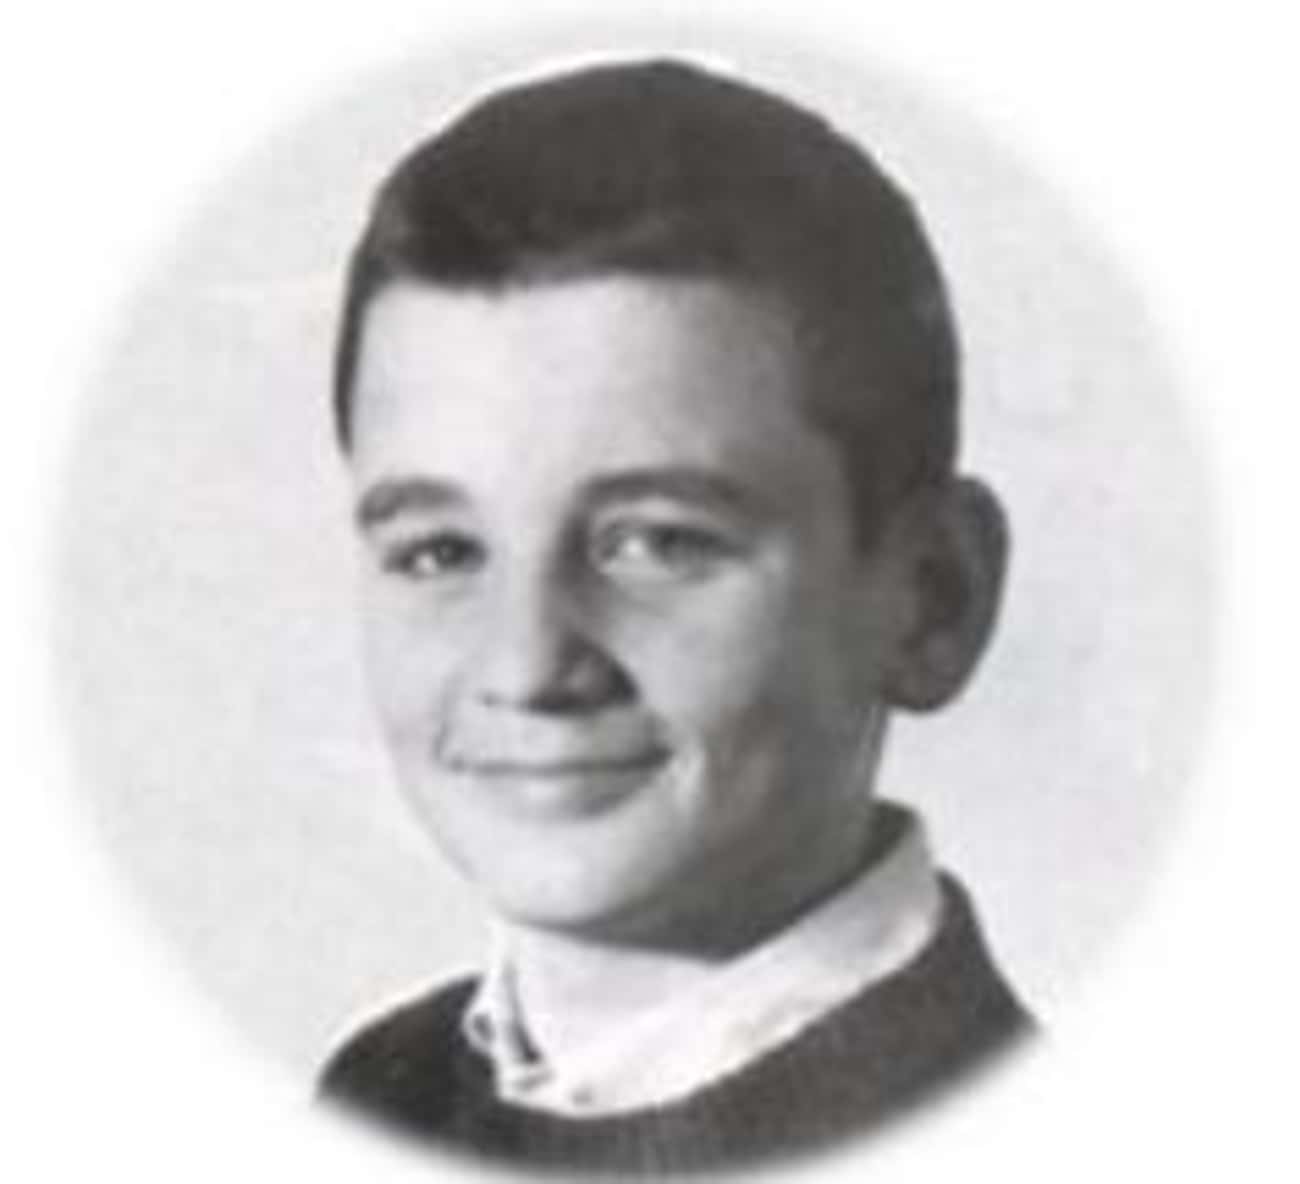 Young Bill Murray as a Kid